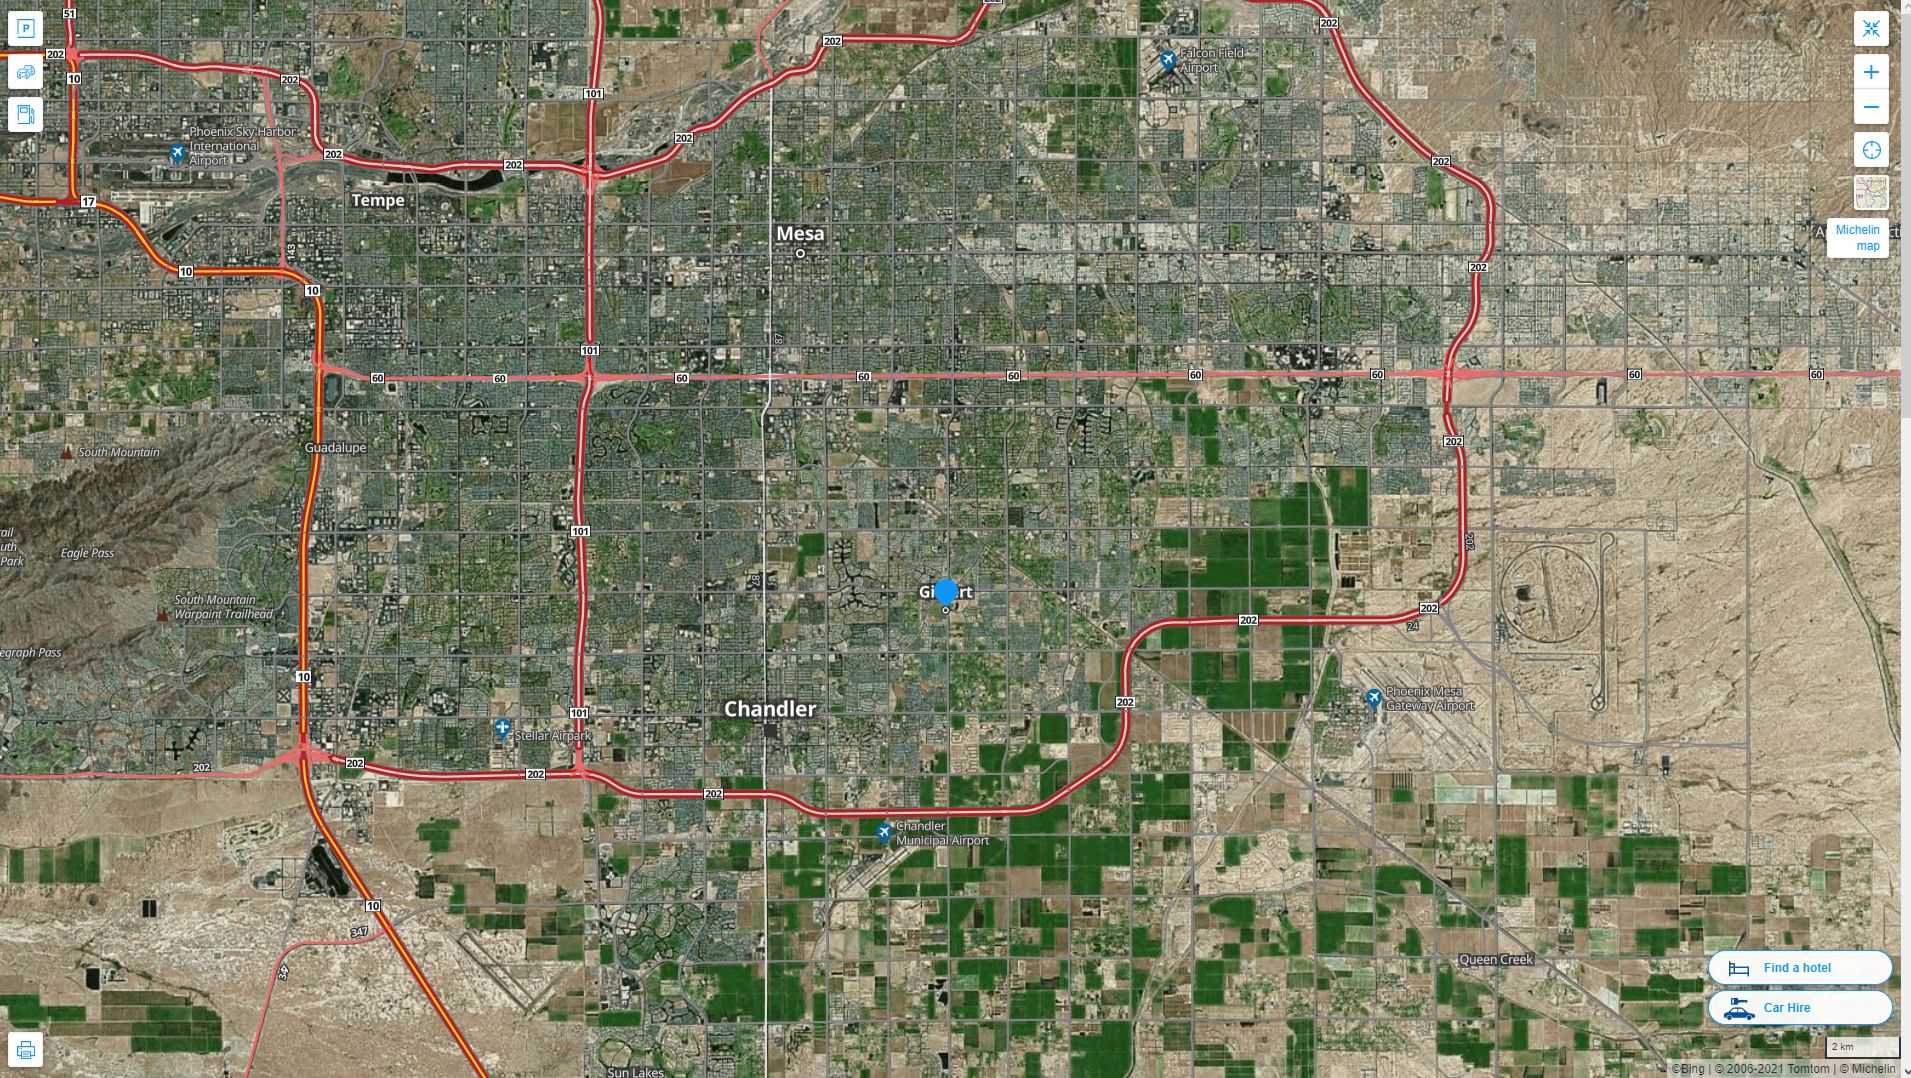 Gilbert Arizona Highway and Road Map with Satellite View